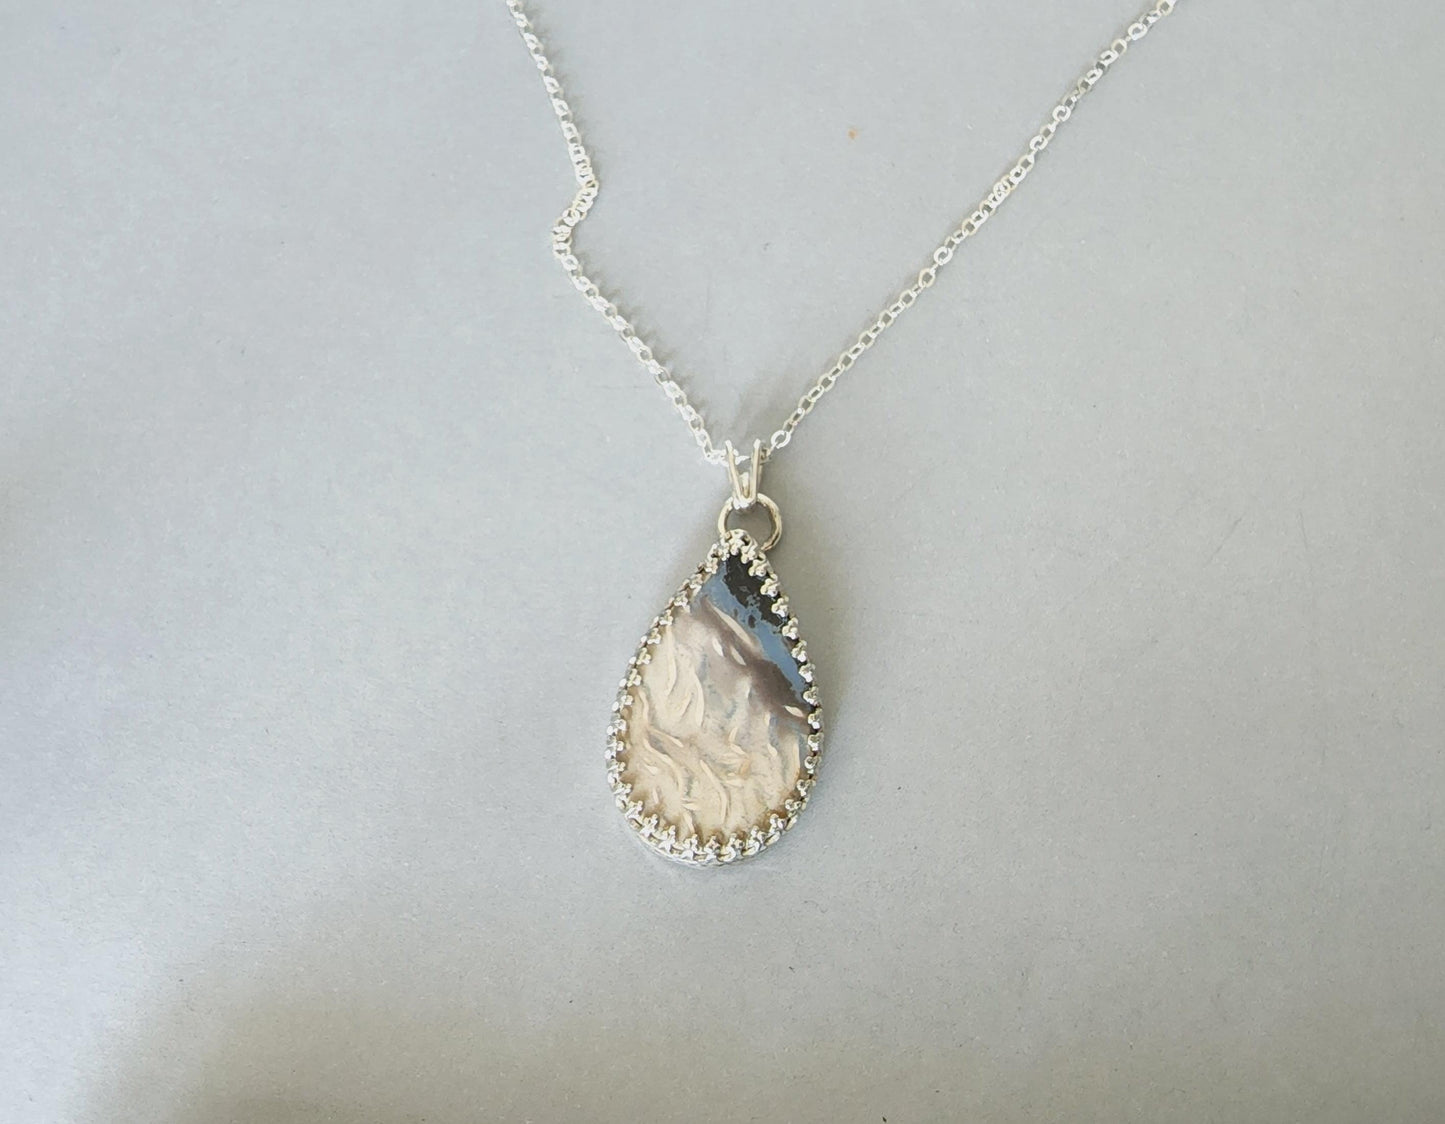 Handmade Sterling Silver and Petrified Palmwood Stone Fossil Teardrop Necklace - Gilded Heart Designs